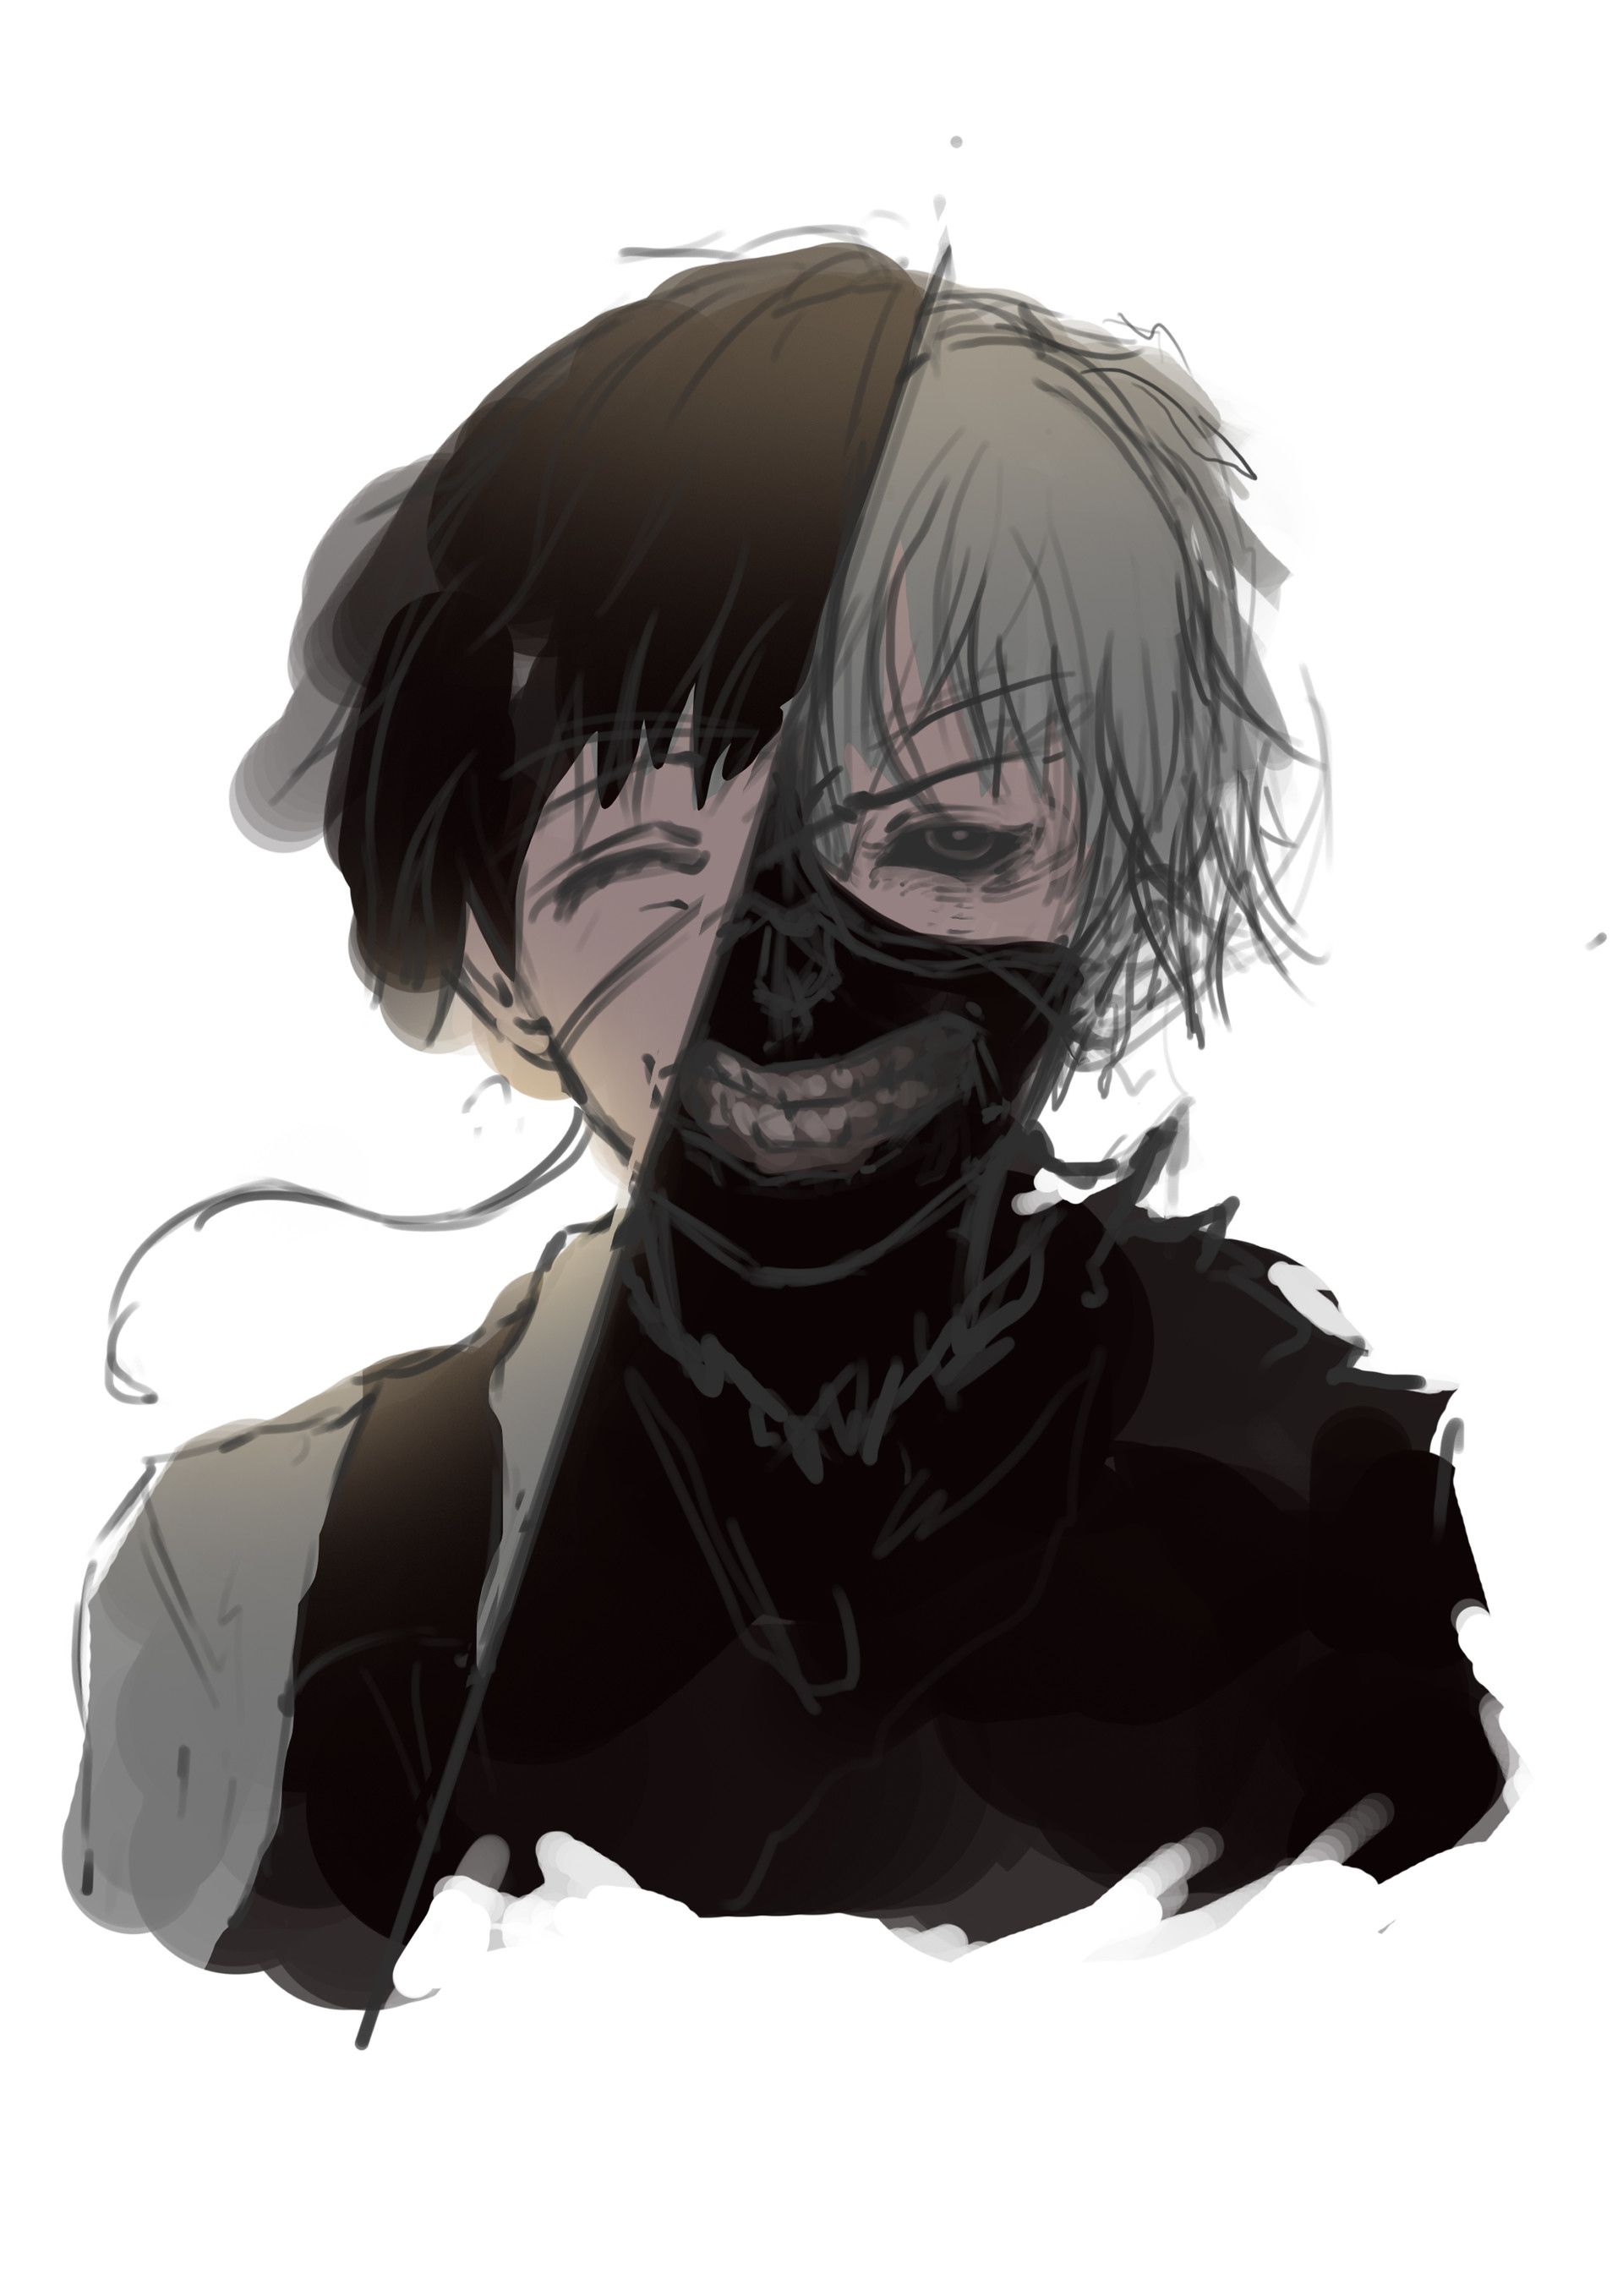 A half-human, half-dead man with a black face mask. - Tokyo Ghoul